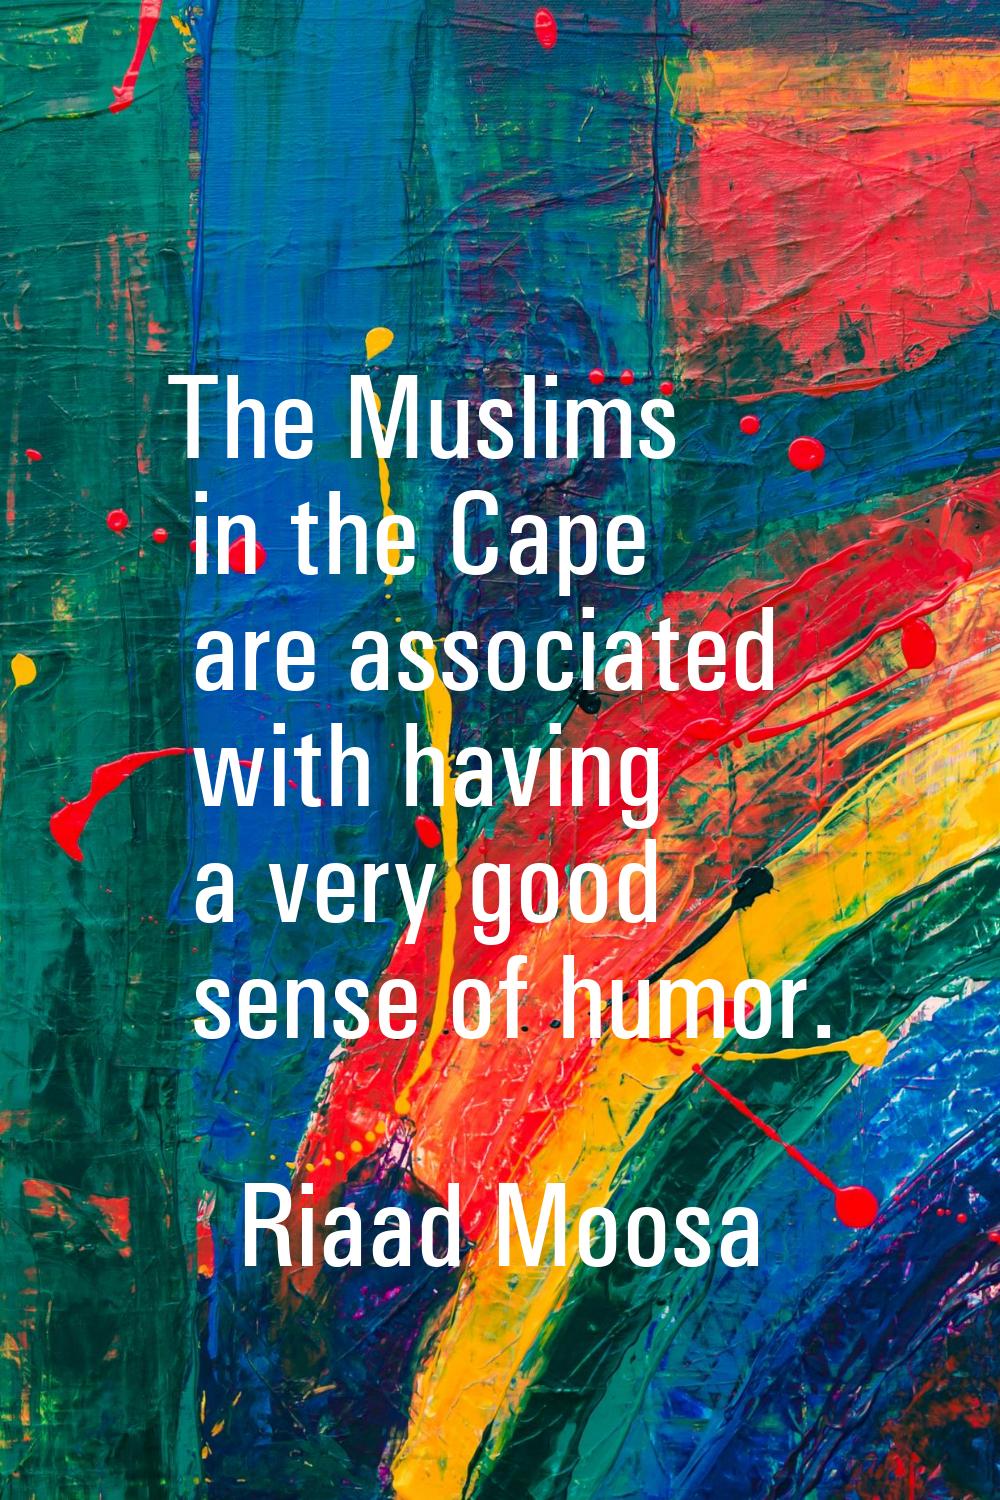 The Muslims in the Cape are associated with having a very good sense of humor.